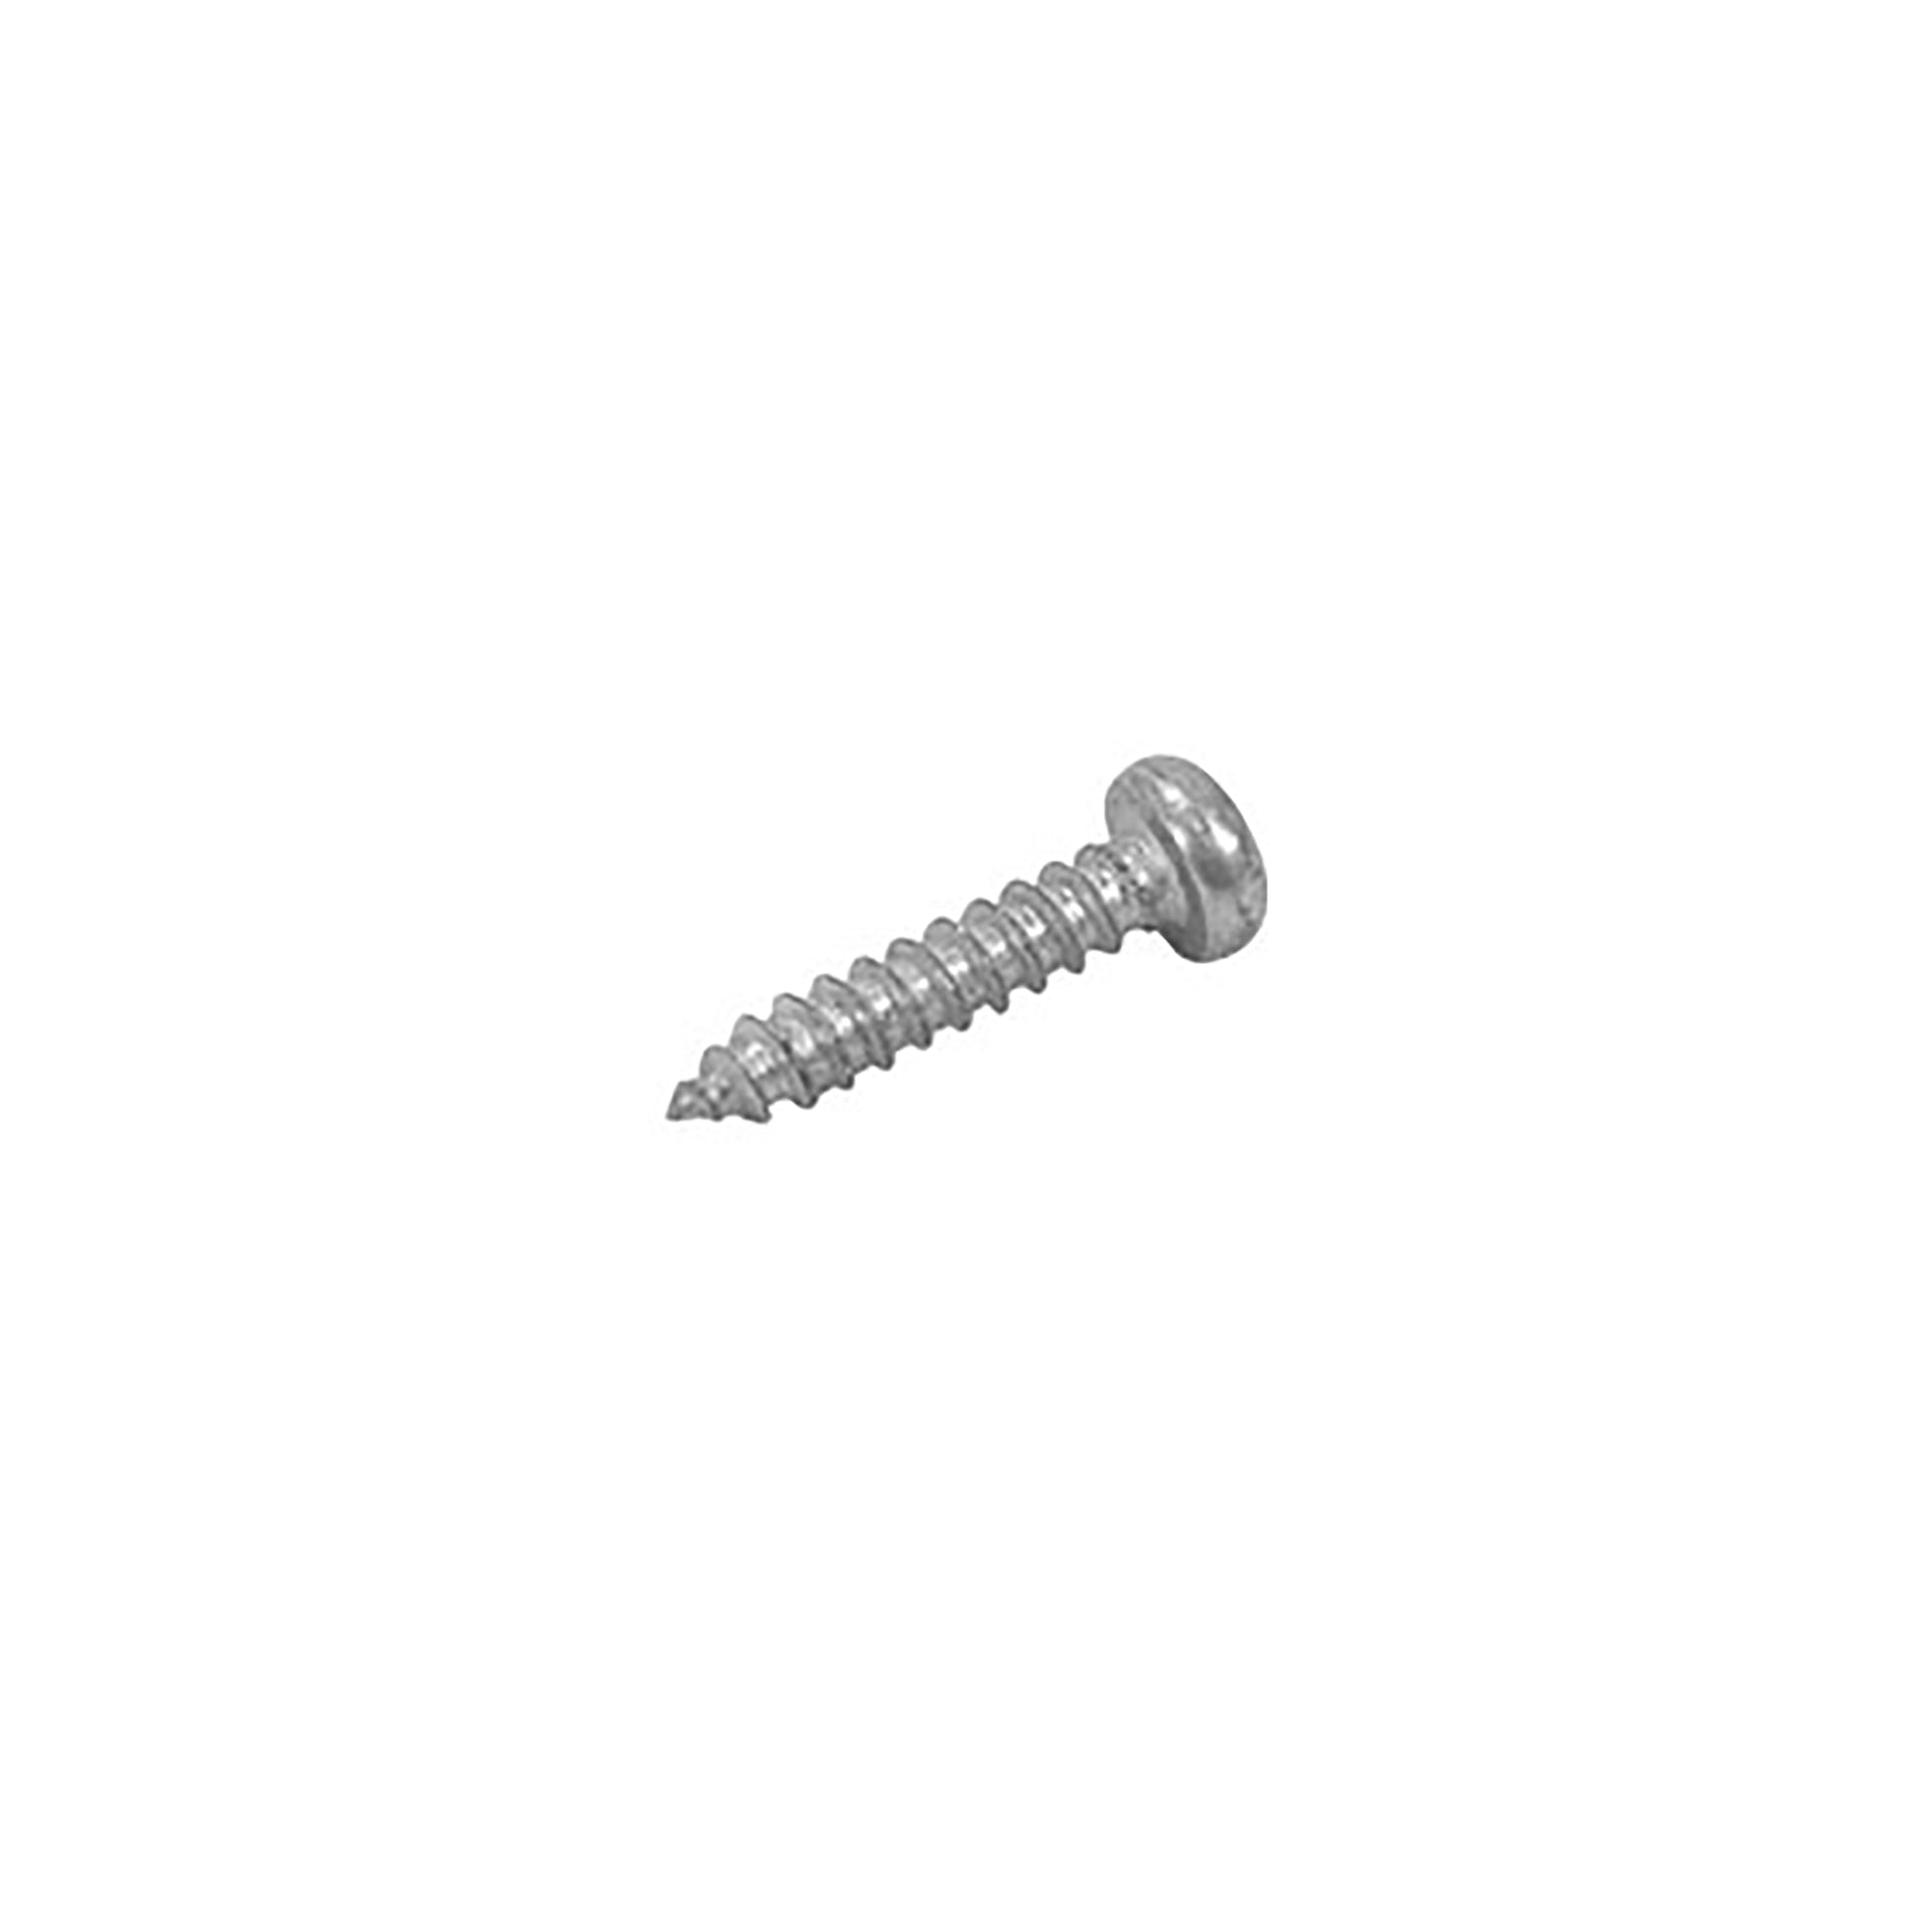 Pan Head Philips Self-tapp Screw For Capacitor Assembly for BR-252A Inflatable Blower